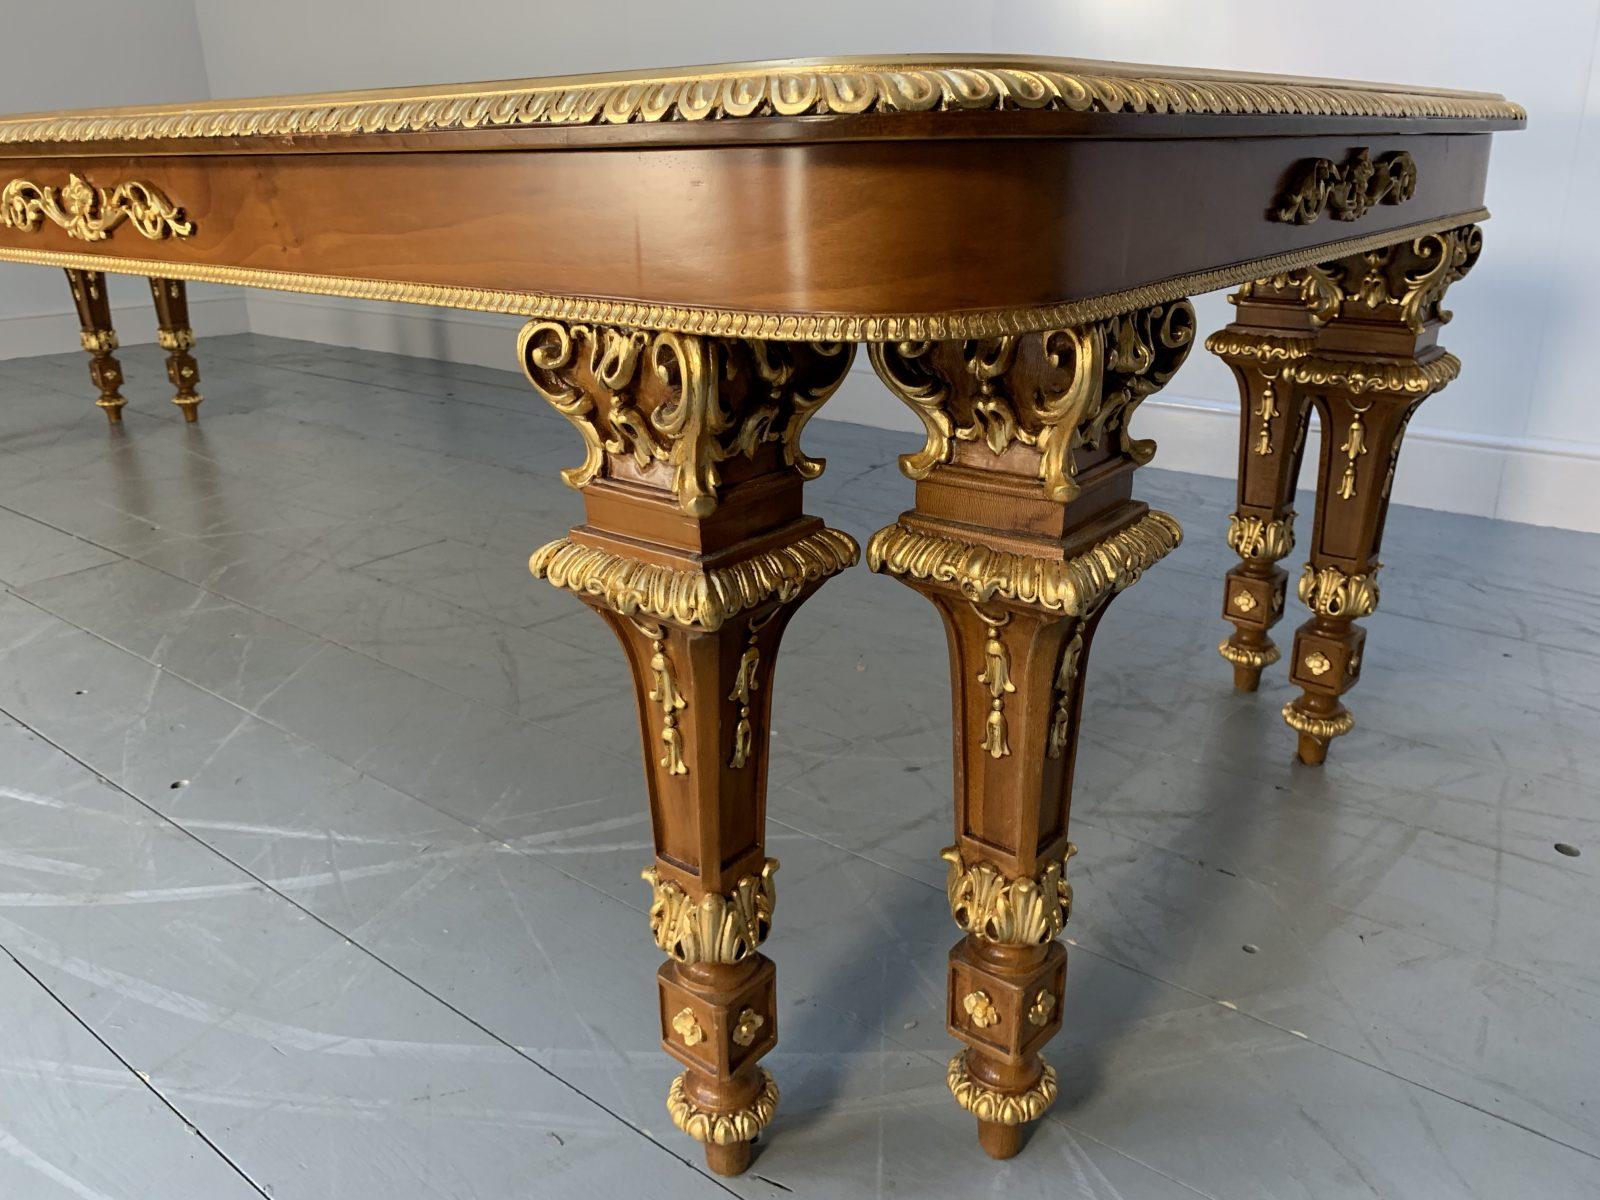 Asnaghi “Eubea” Dining Table and 12 Chair Suite in Harwood, Gilt and Silk In Good Condition For Sale In Barrowford, GB